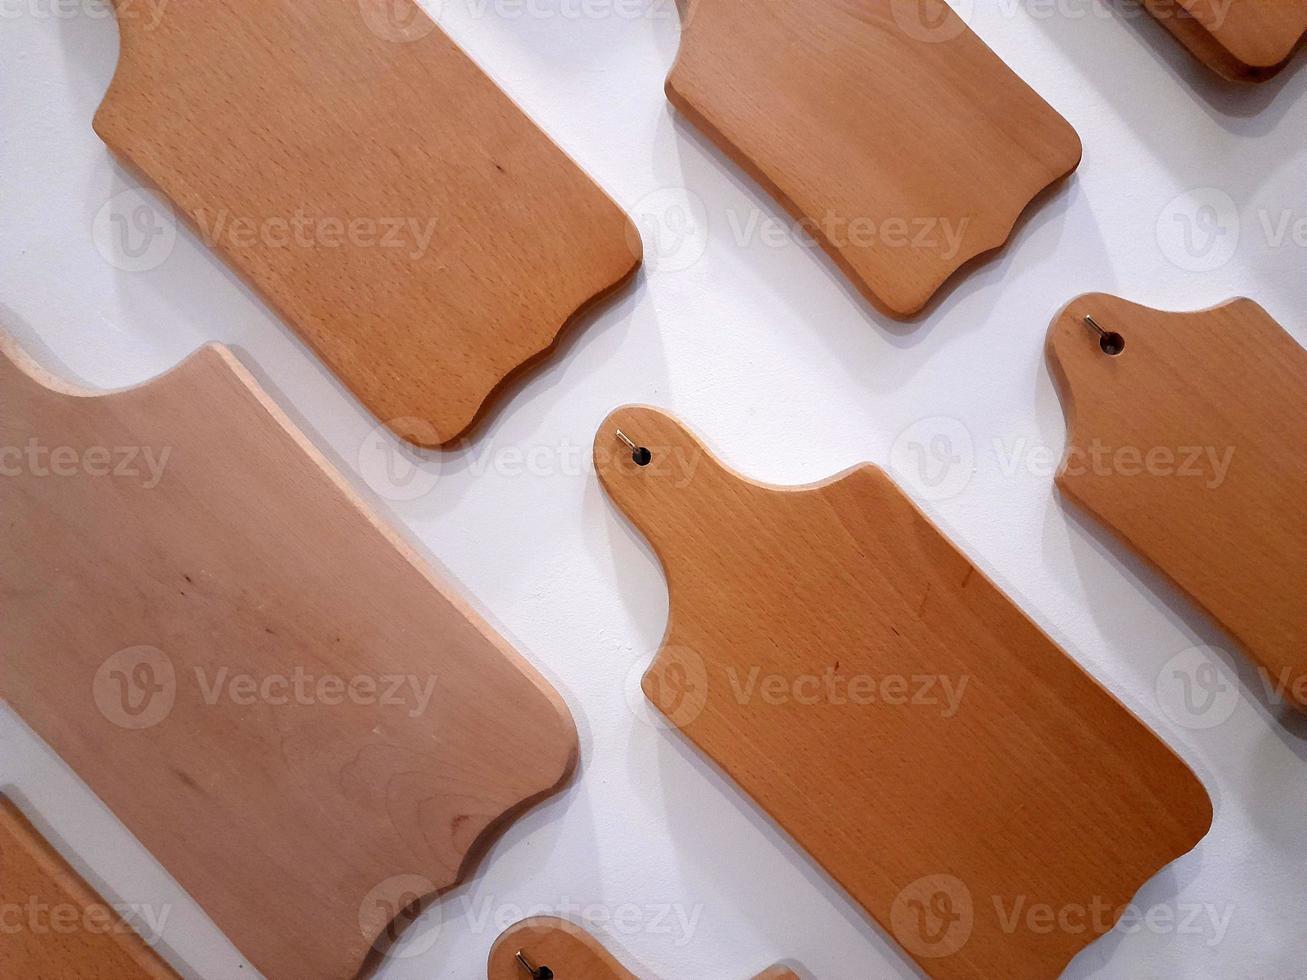 https://static.vecteezy.com/system/resources/previews/022/903/375/non_2x/cutting-boards-wooden-cutting-boards-wooden-crafts-photo.jpg